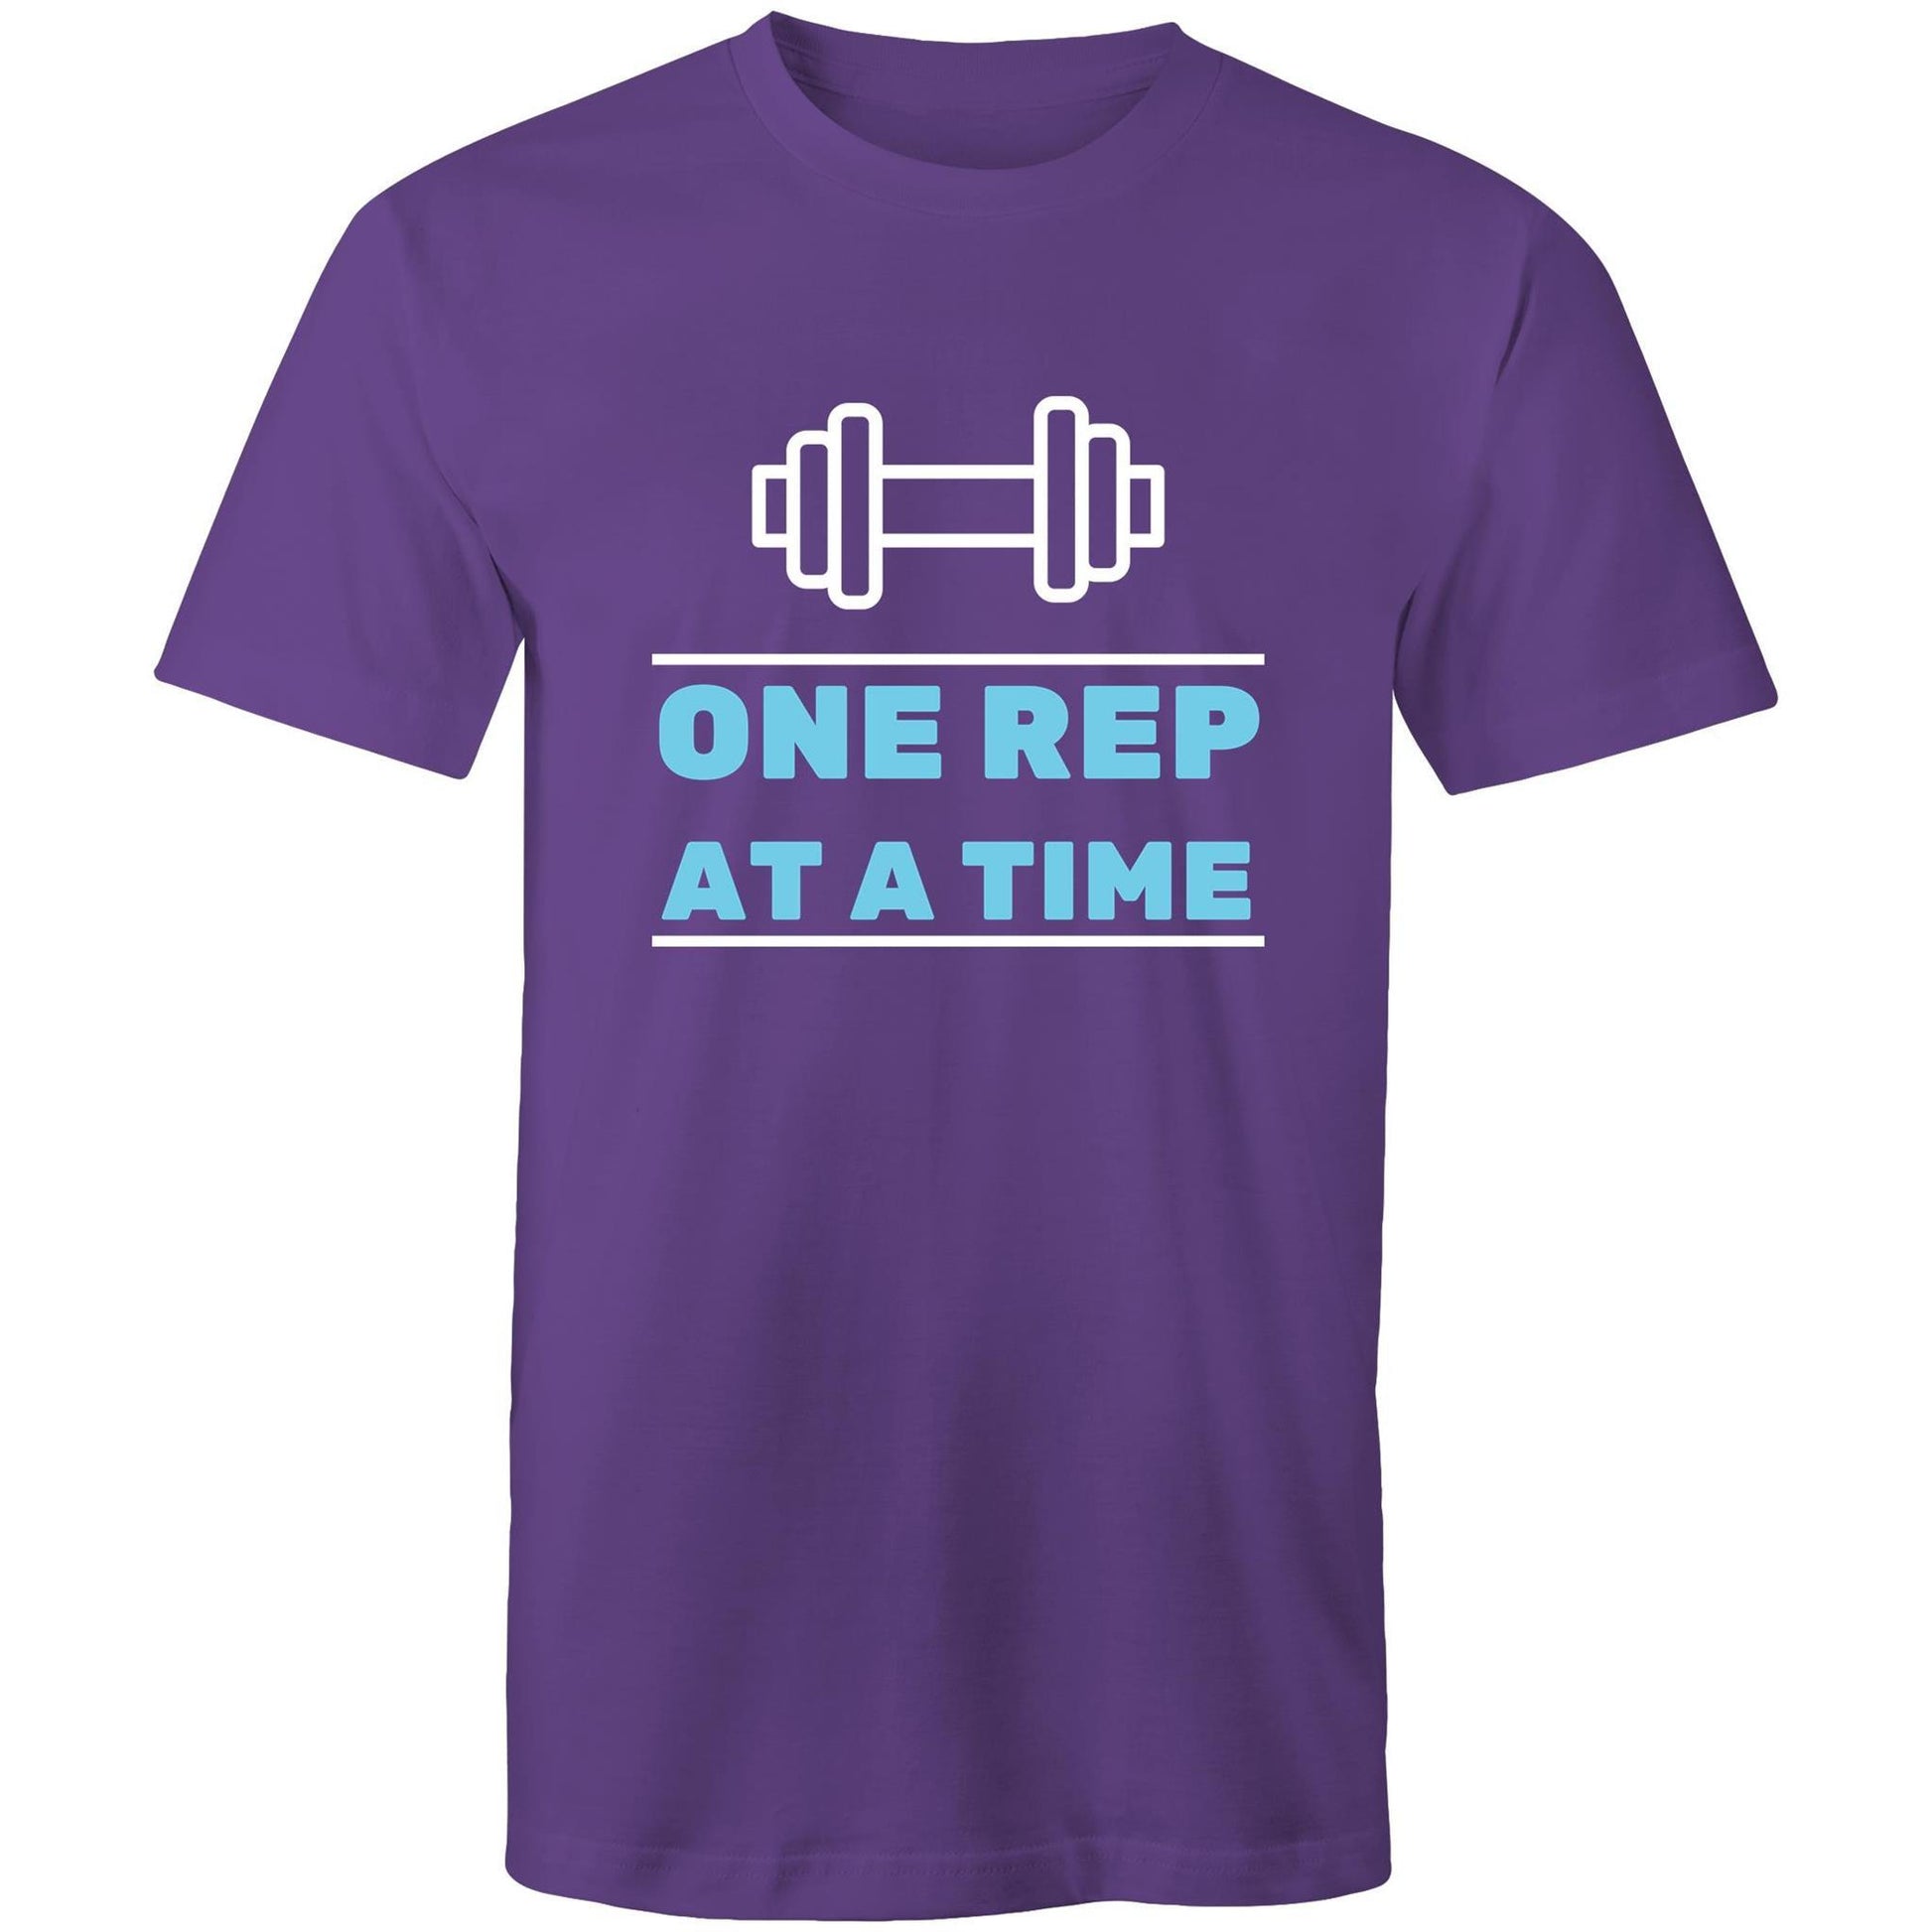 One Rep At A Time - Short Sleeve T-shirt Purple Fitness T-shirt Fitness Mens Womens